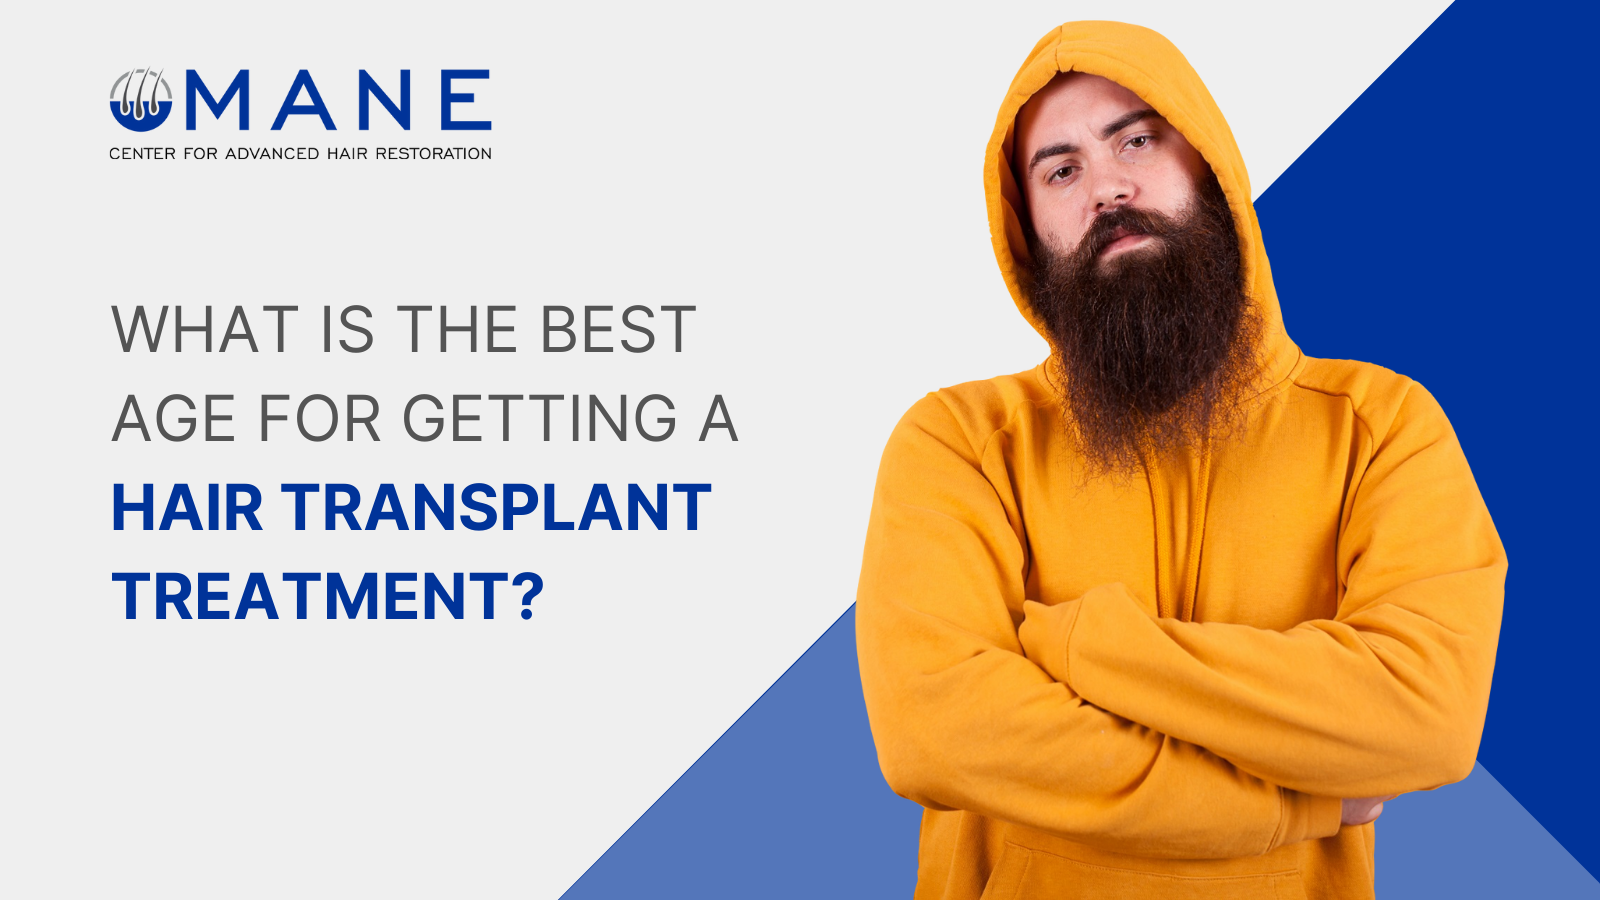 What Is The Best Age for Getting a Hair Transplant Treatment?